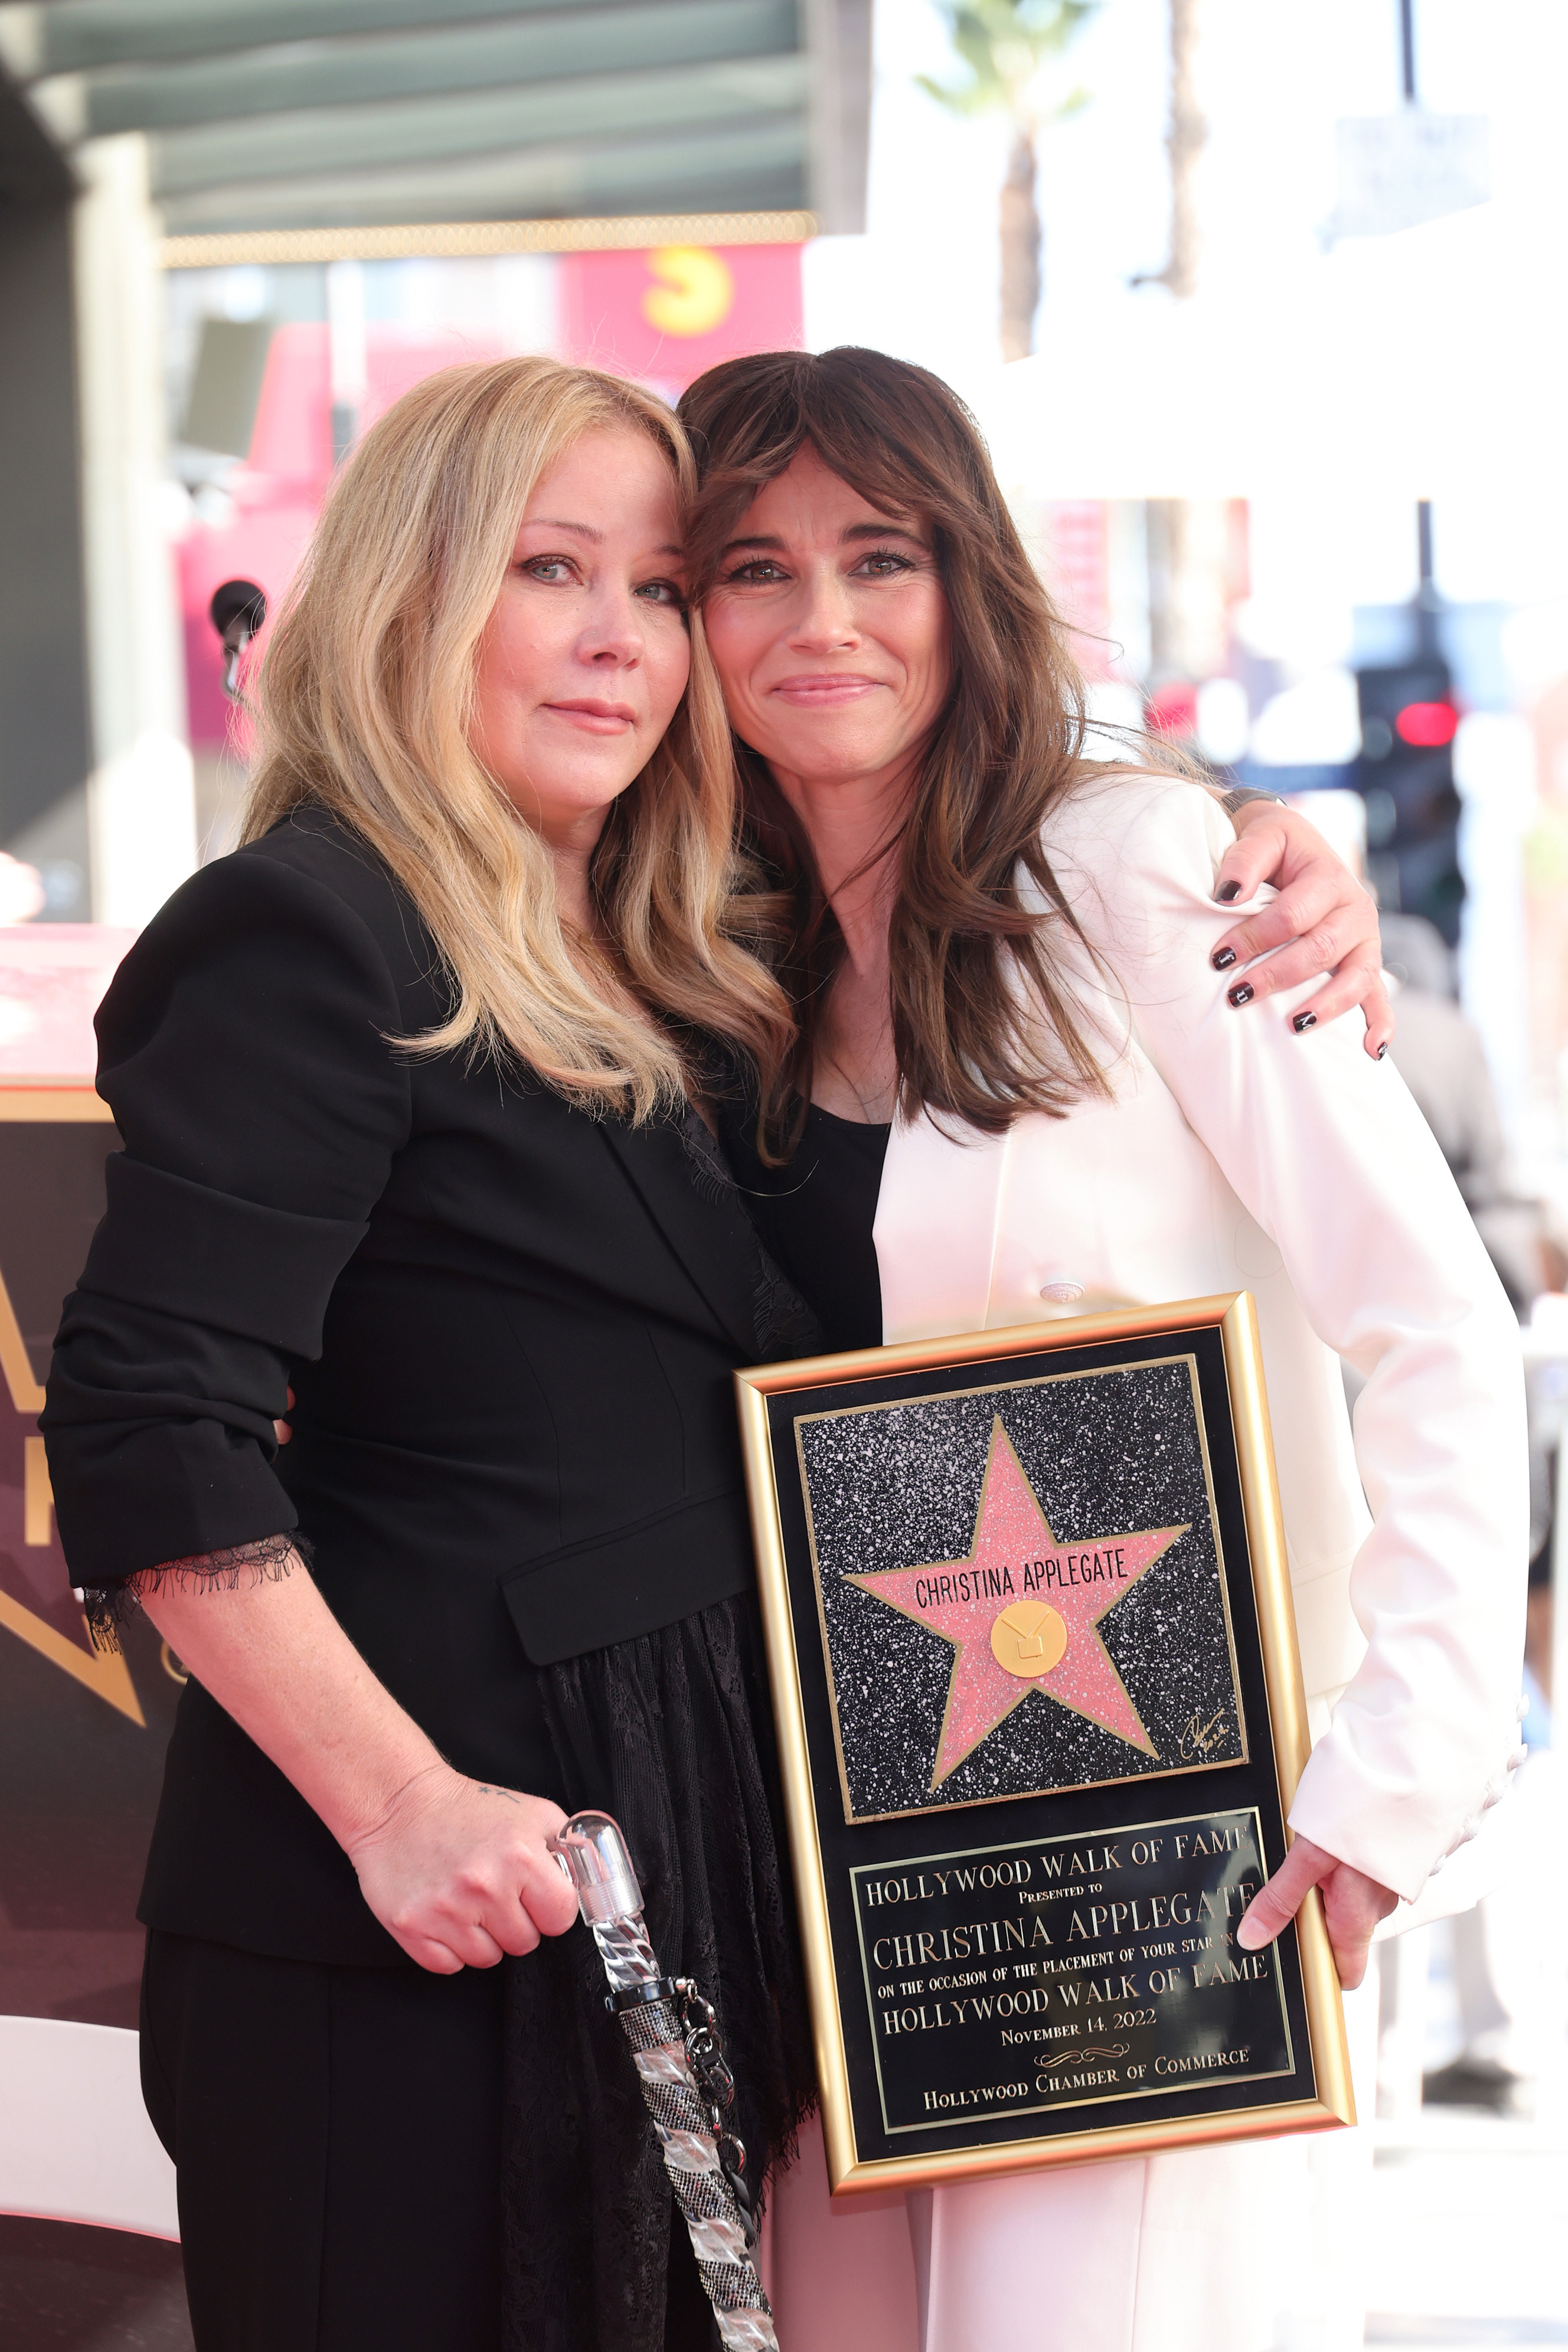 Christina and Linda with their arms around each other at the walk of fame ceremony